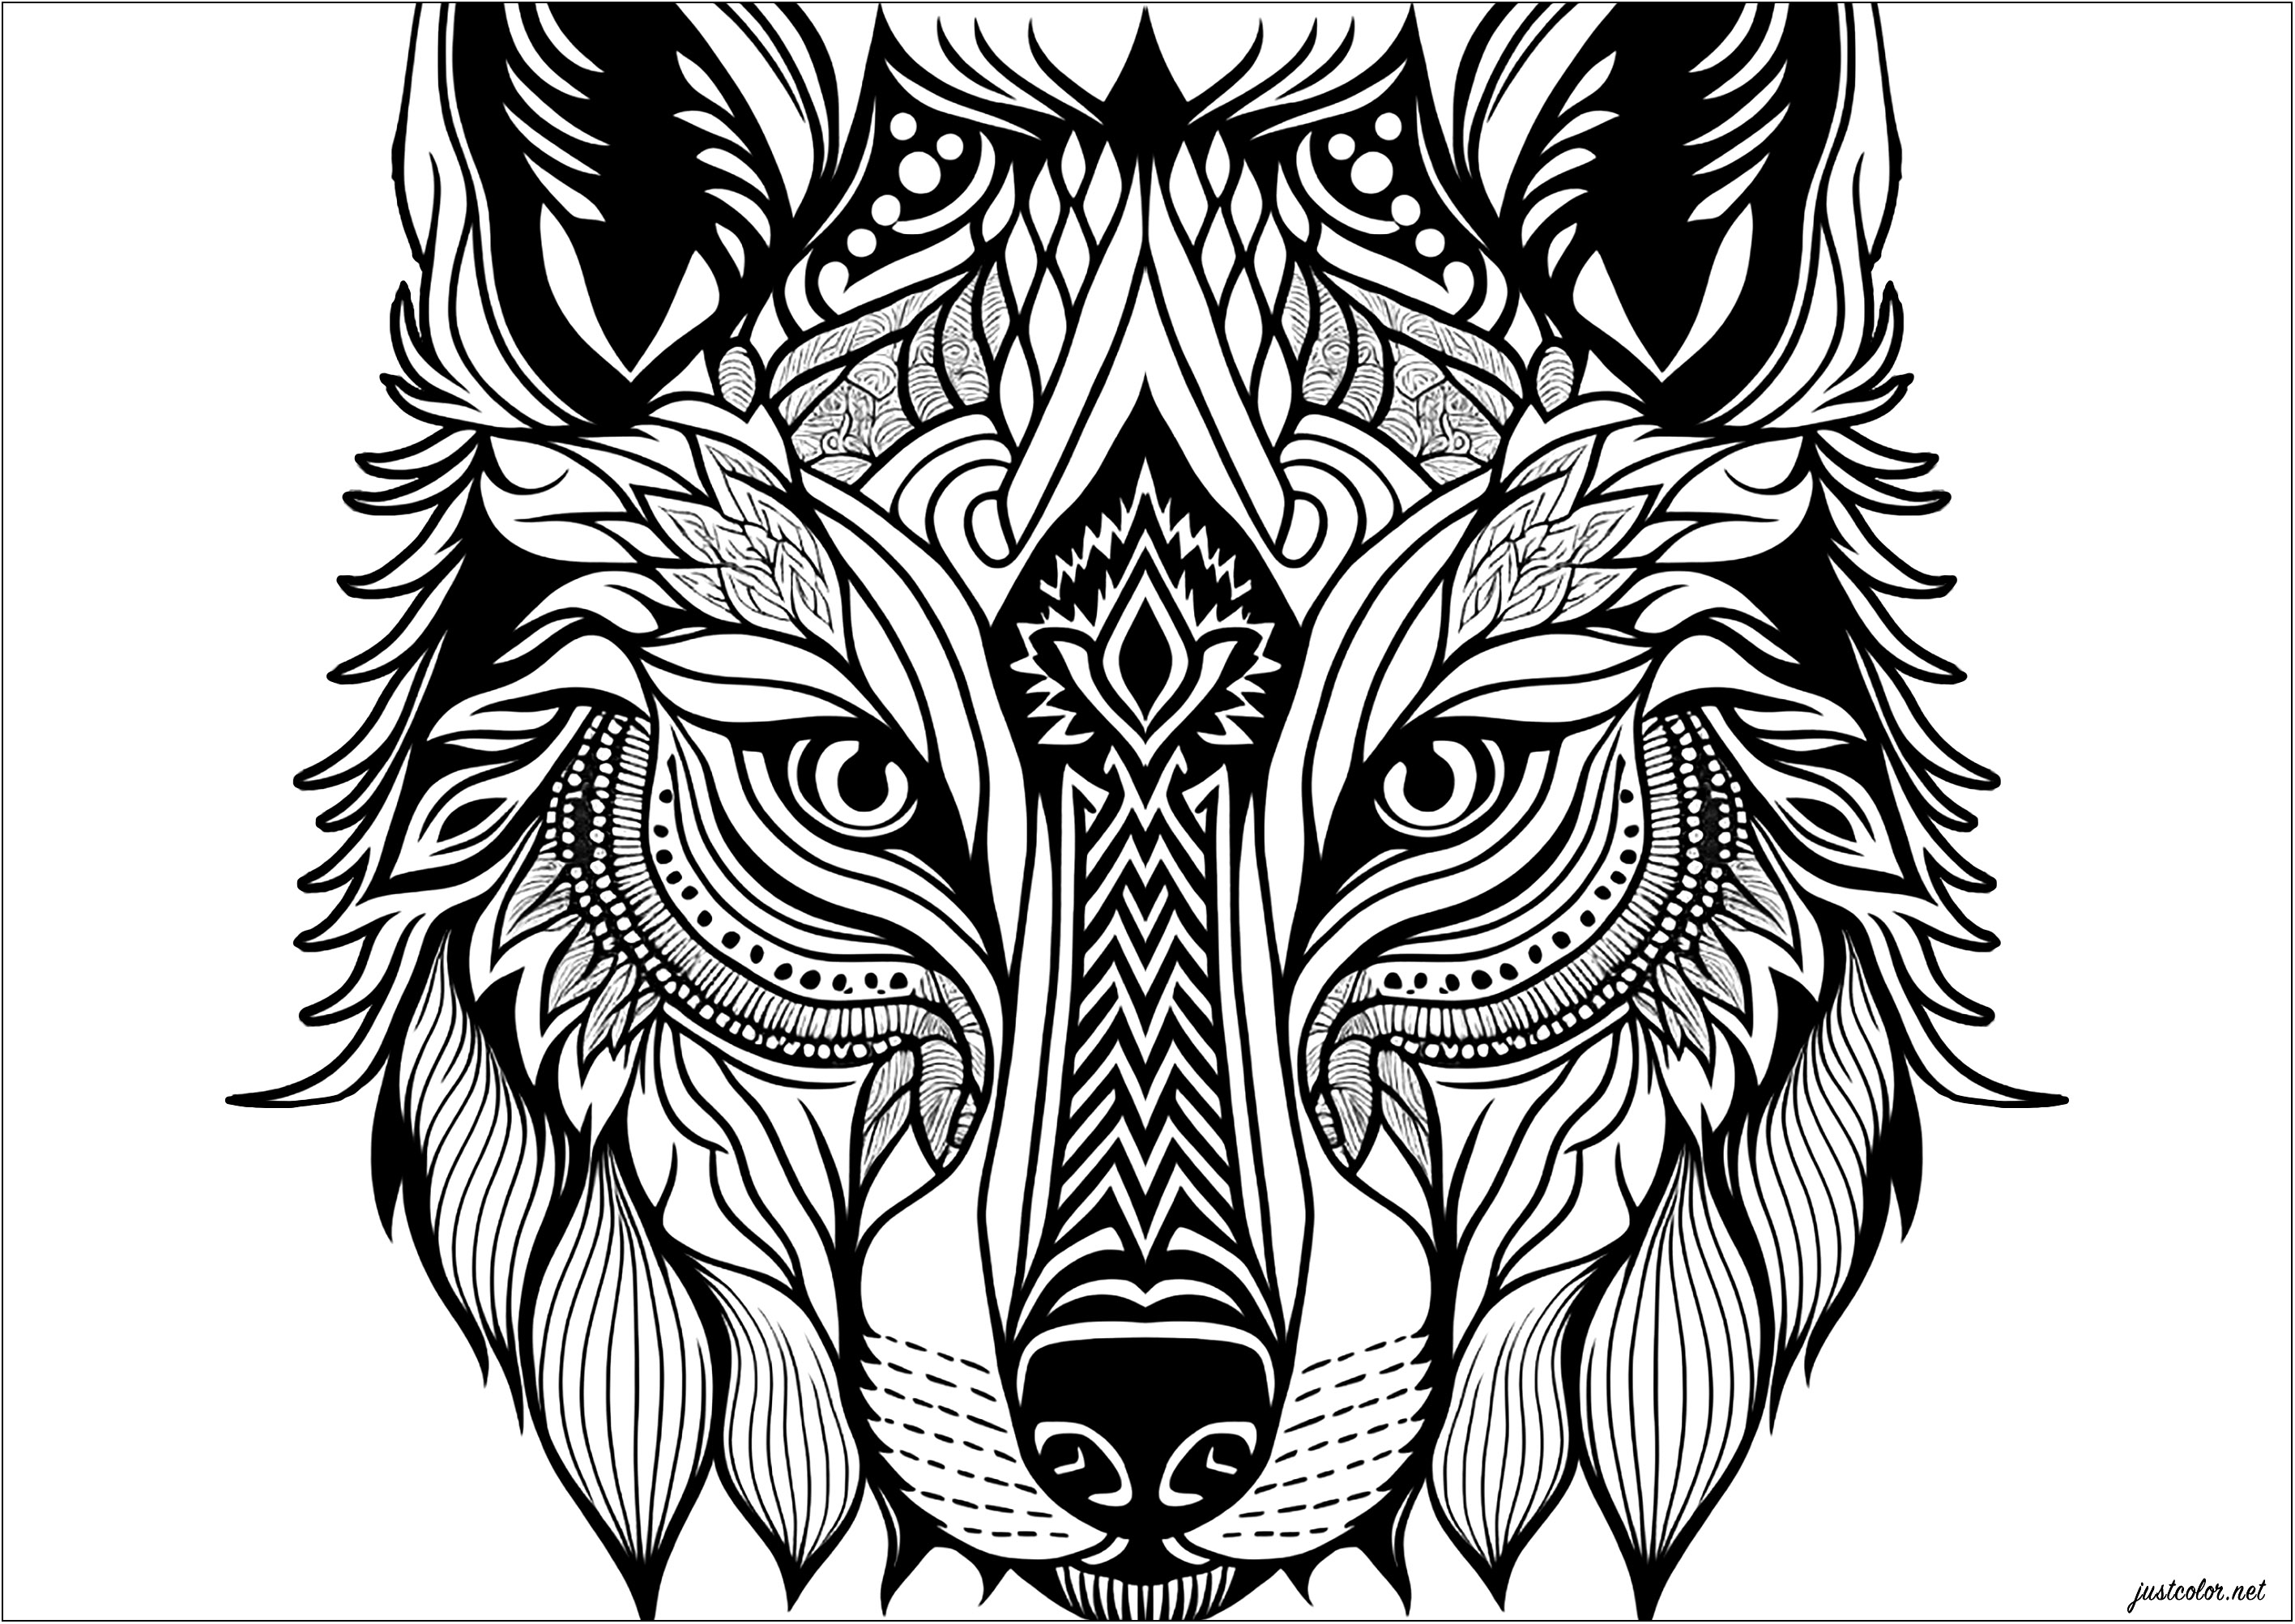 Unleash your imagination with this stunning coloring page of a wolf head. The intricate design features abstract and geometrical patterns, creating a mesmerizing and visually captivating masterpiece. Your task is to bring these lines and shapes to life with bold and vibrant colors, making the wolf head come alive in a unique and colorful way.